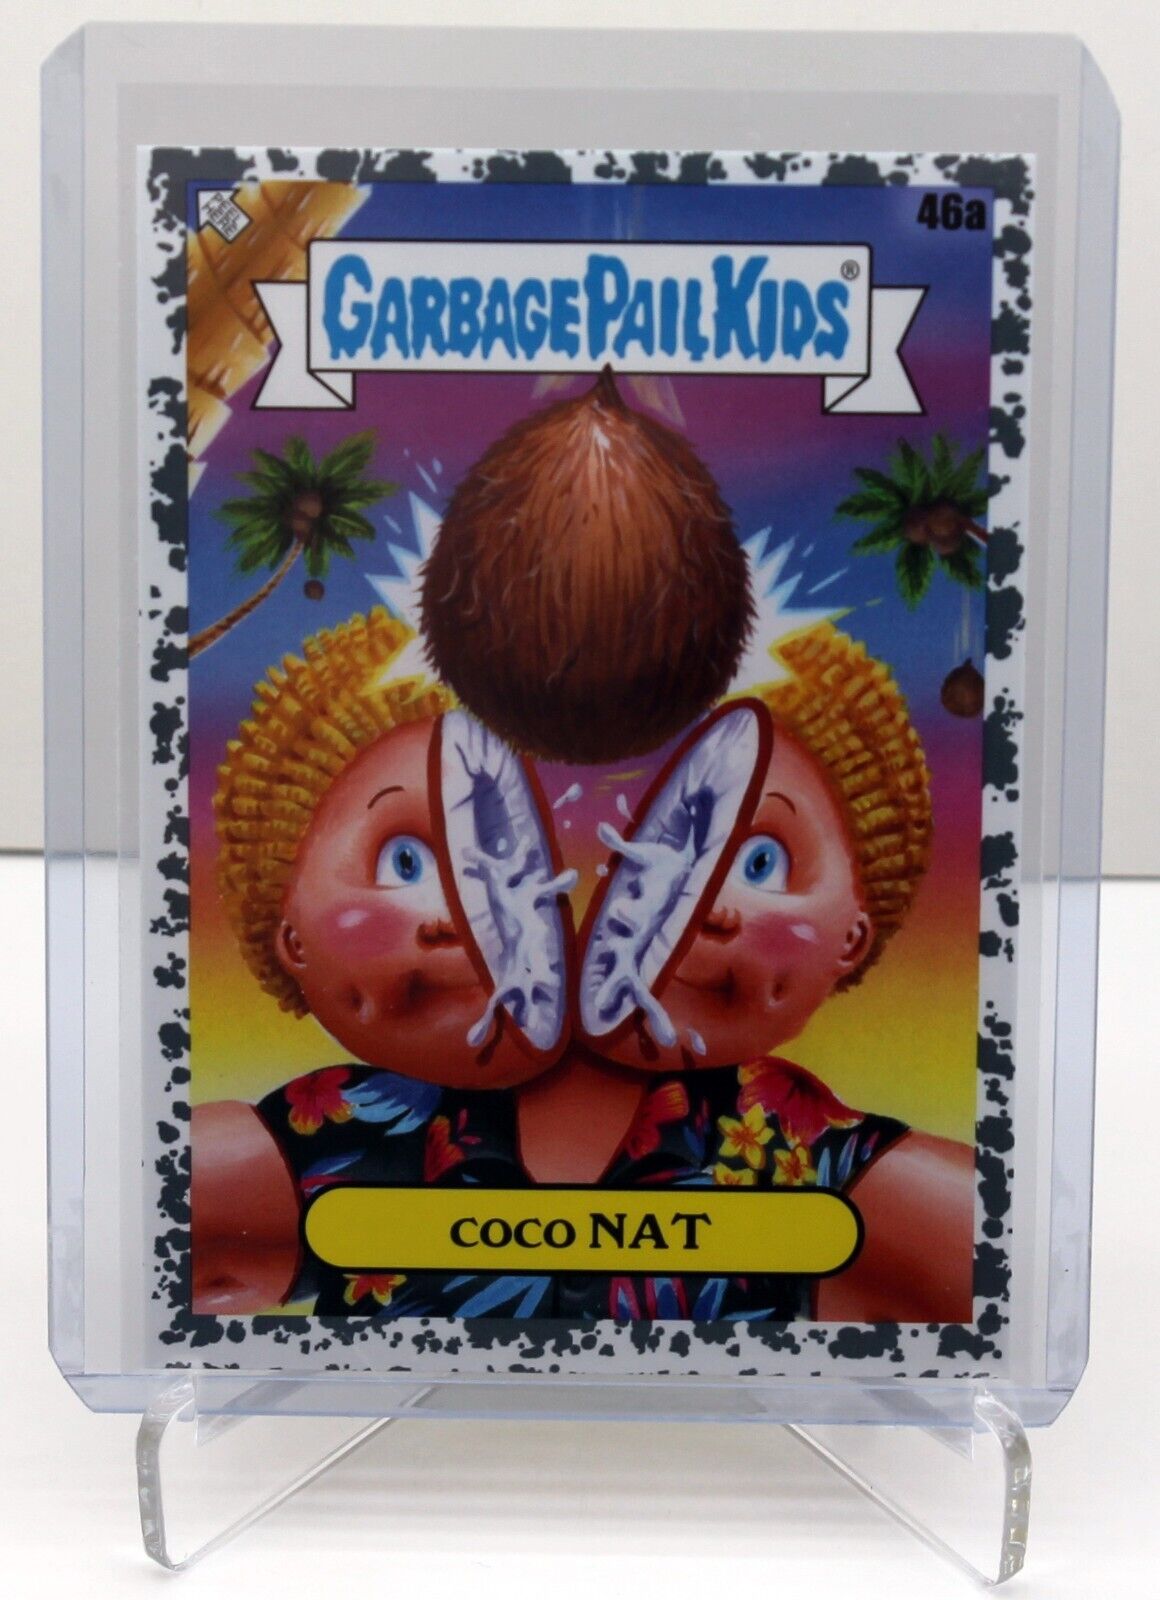 Garbage Pail Kids Goes on Vacation Route 66 Asphalt #46a Coco Nat 39/66